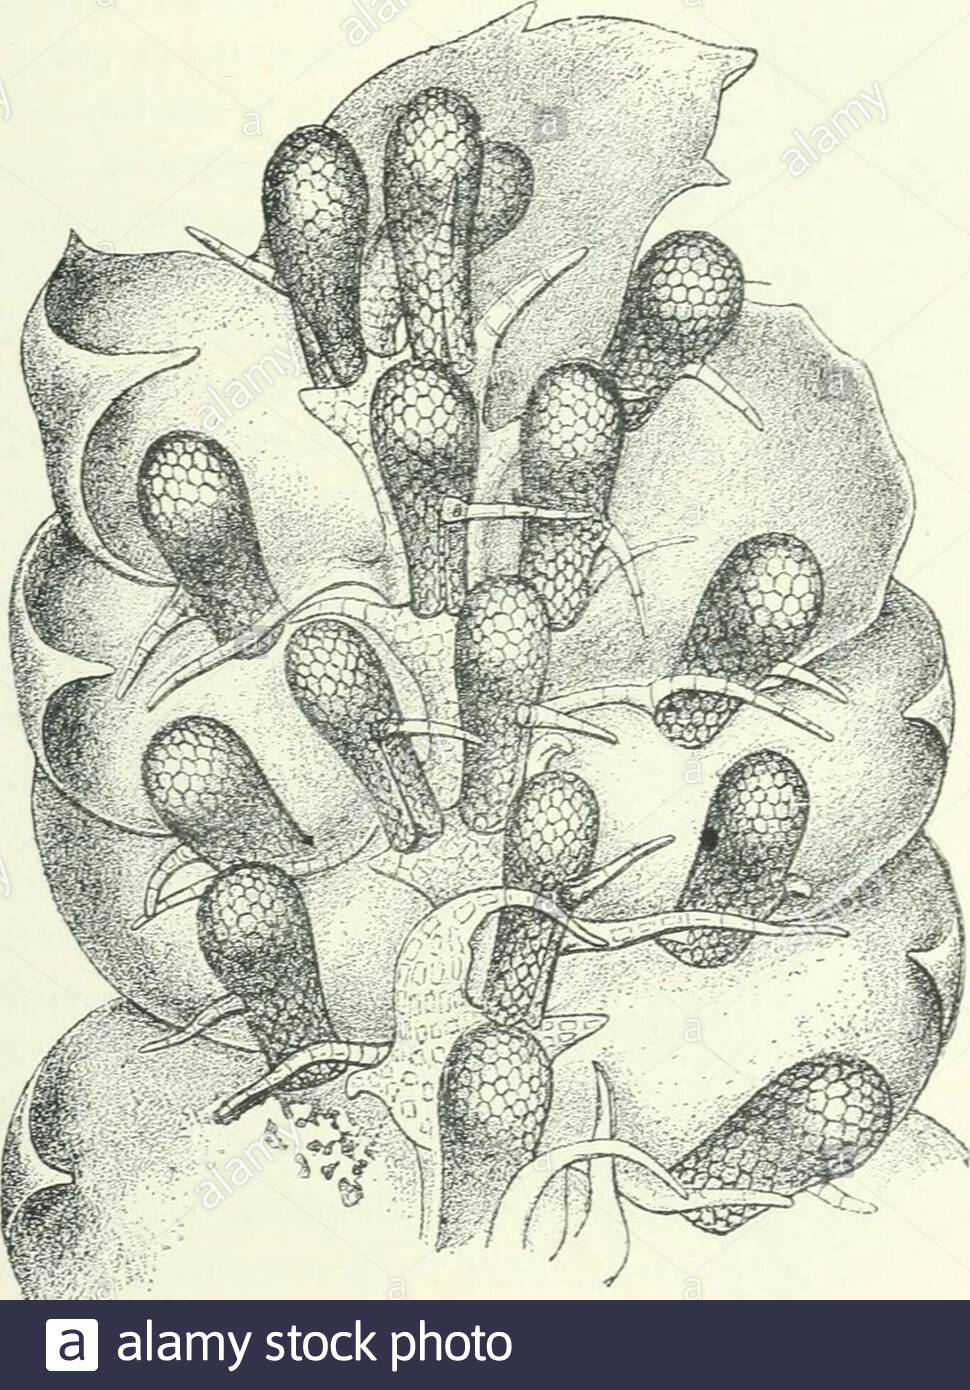 organography of plants especially of the archegoniatae and spermaphyta hebedeutung in flora ixxvii 1893 p 431 plate viii and ix figs i 2 see goebel op cit p 430 plate viii and ix fig 3 see goebel op cit p 430 plate viii and ix fig is id morphologische und biologischestu n i uber epiphytische fame und muscineen in annales du jardin botanique de buitenzorgviii888 plate v fig 53 with regard to their configuration see goebel pflanzenbiologische schilderungen i 1ss9 p tfigs 78 79 although this was published in 18s9 it has recently been 2ANEN7N